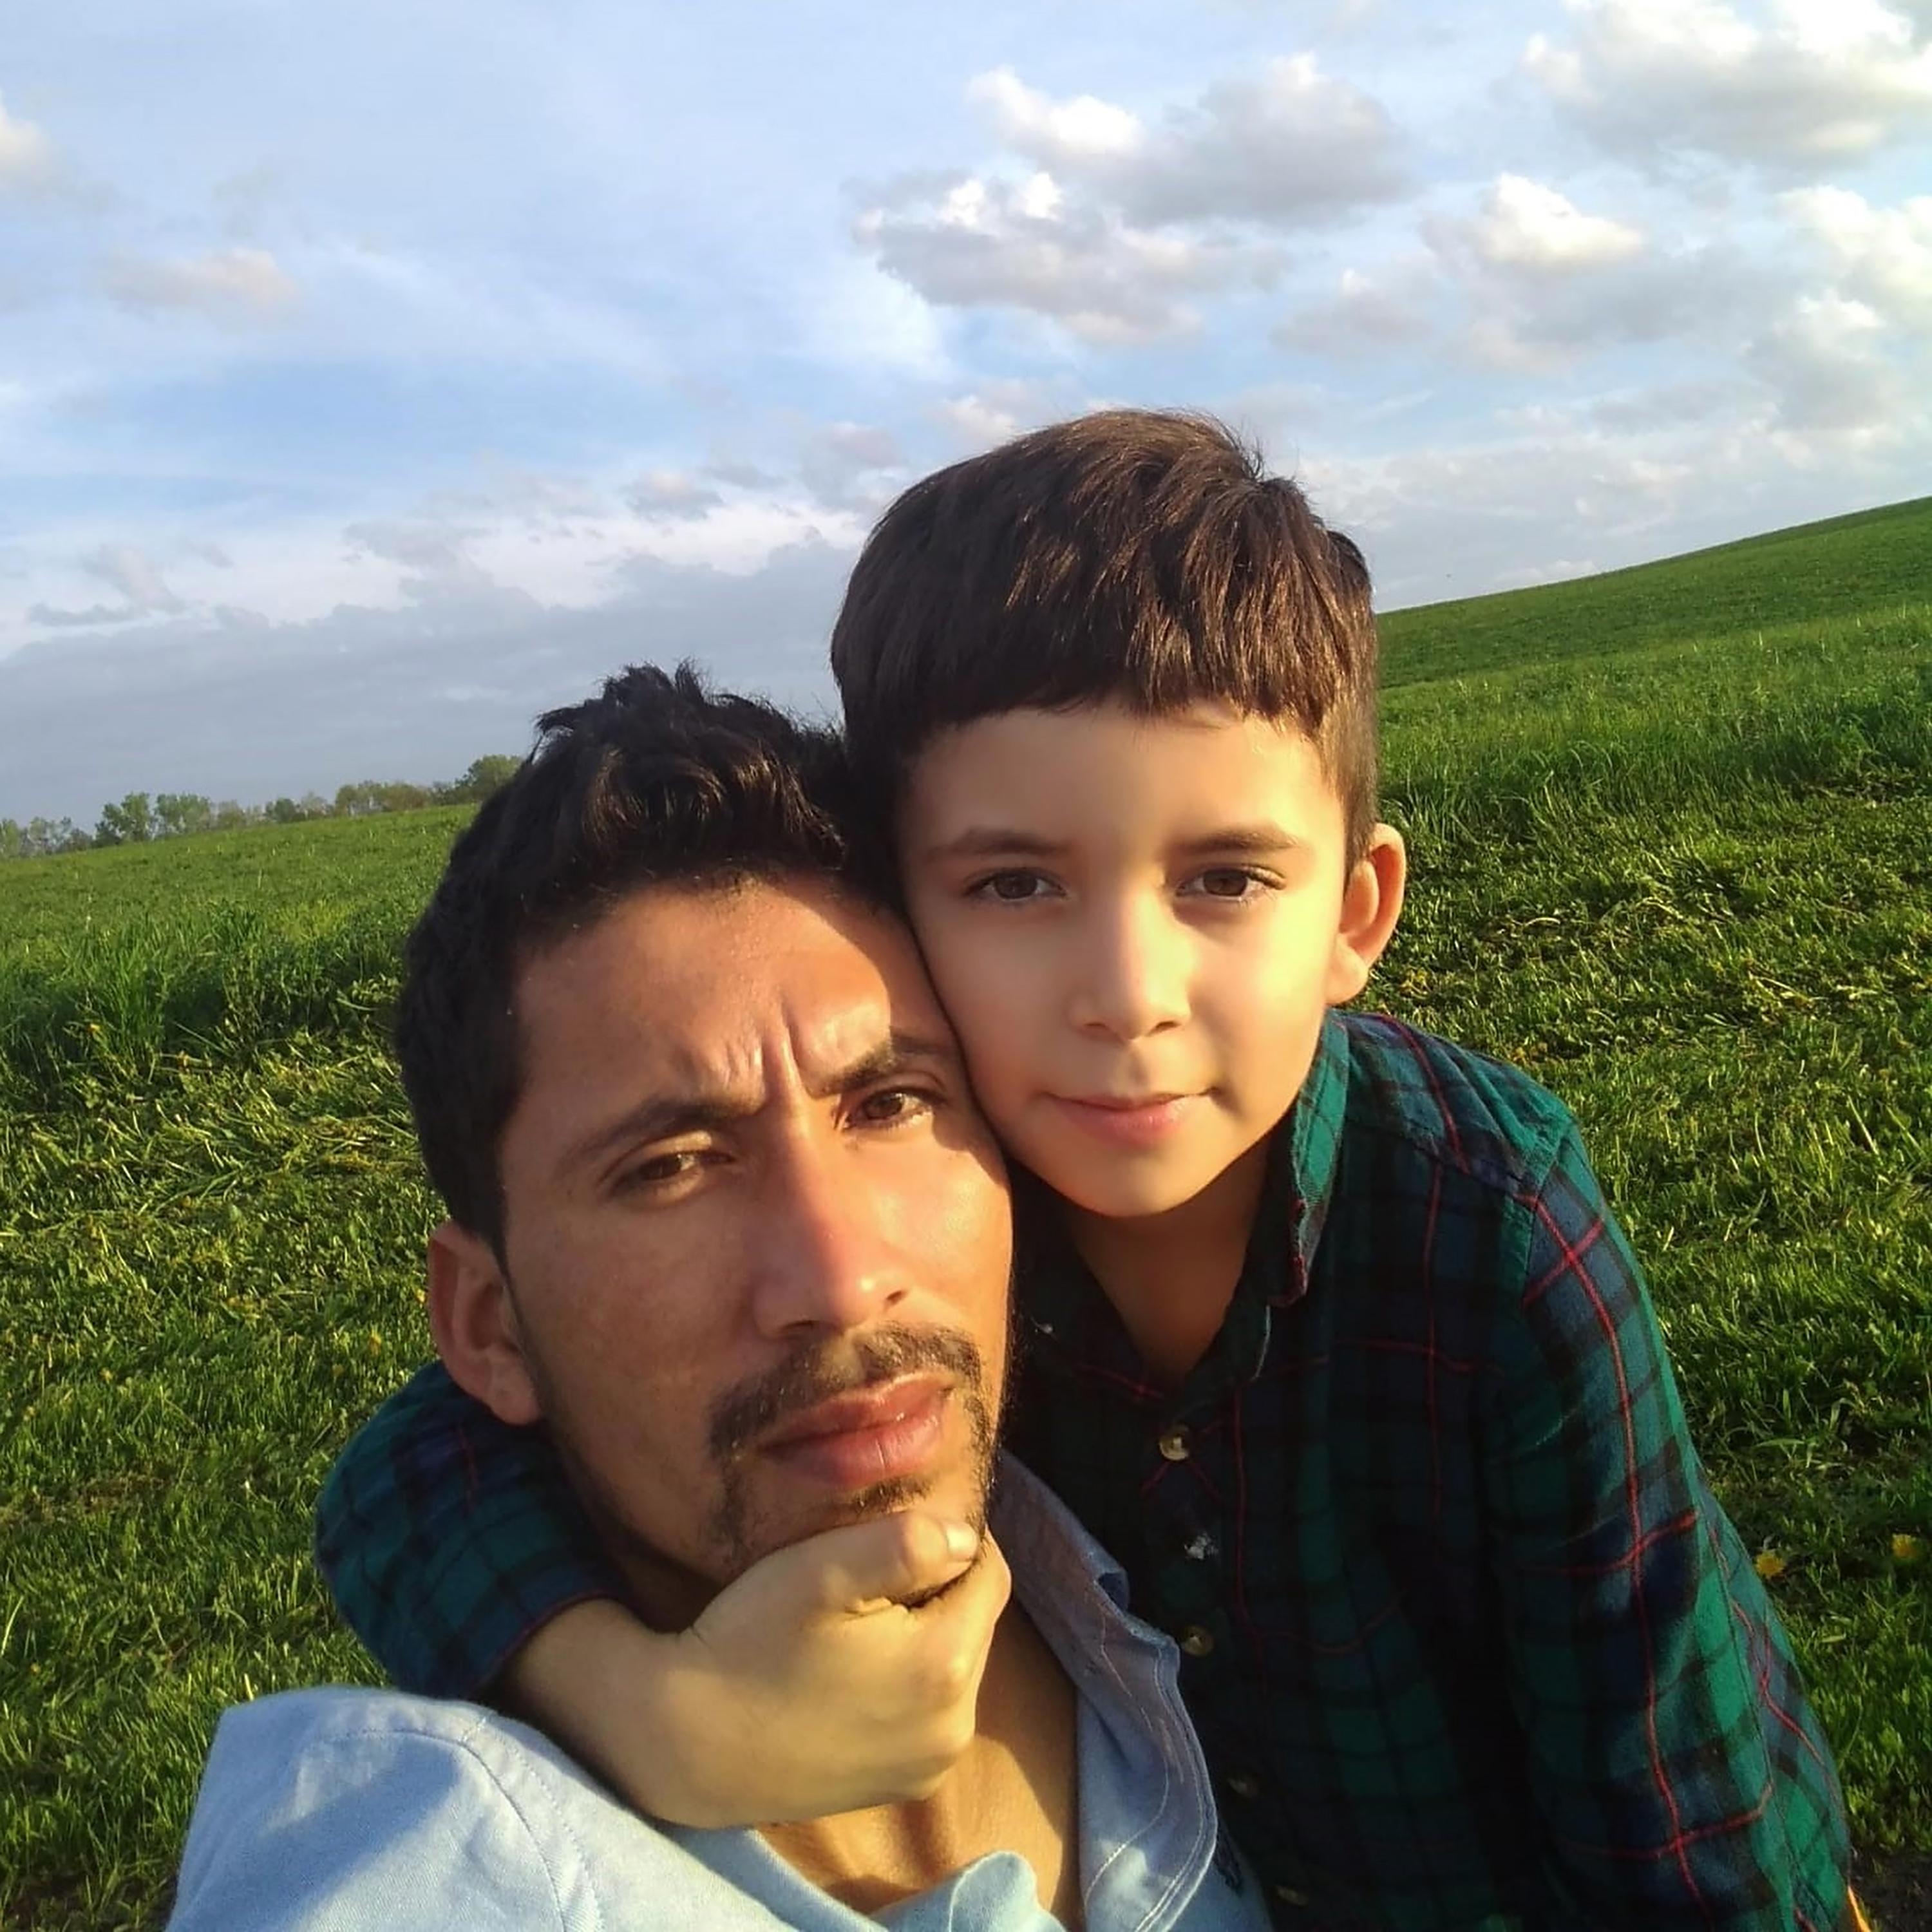 José Rodríguez and his son Jefferson in a photo taken shortly after their arrival in the state of Wisconsin from Nicaragua. El Faro photo courtesy of José María Rodríguez Uriarte.